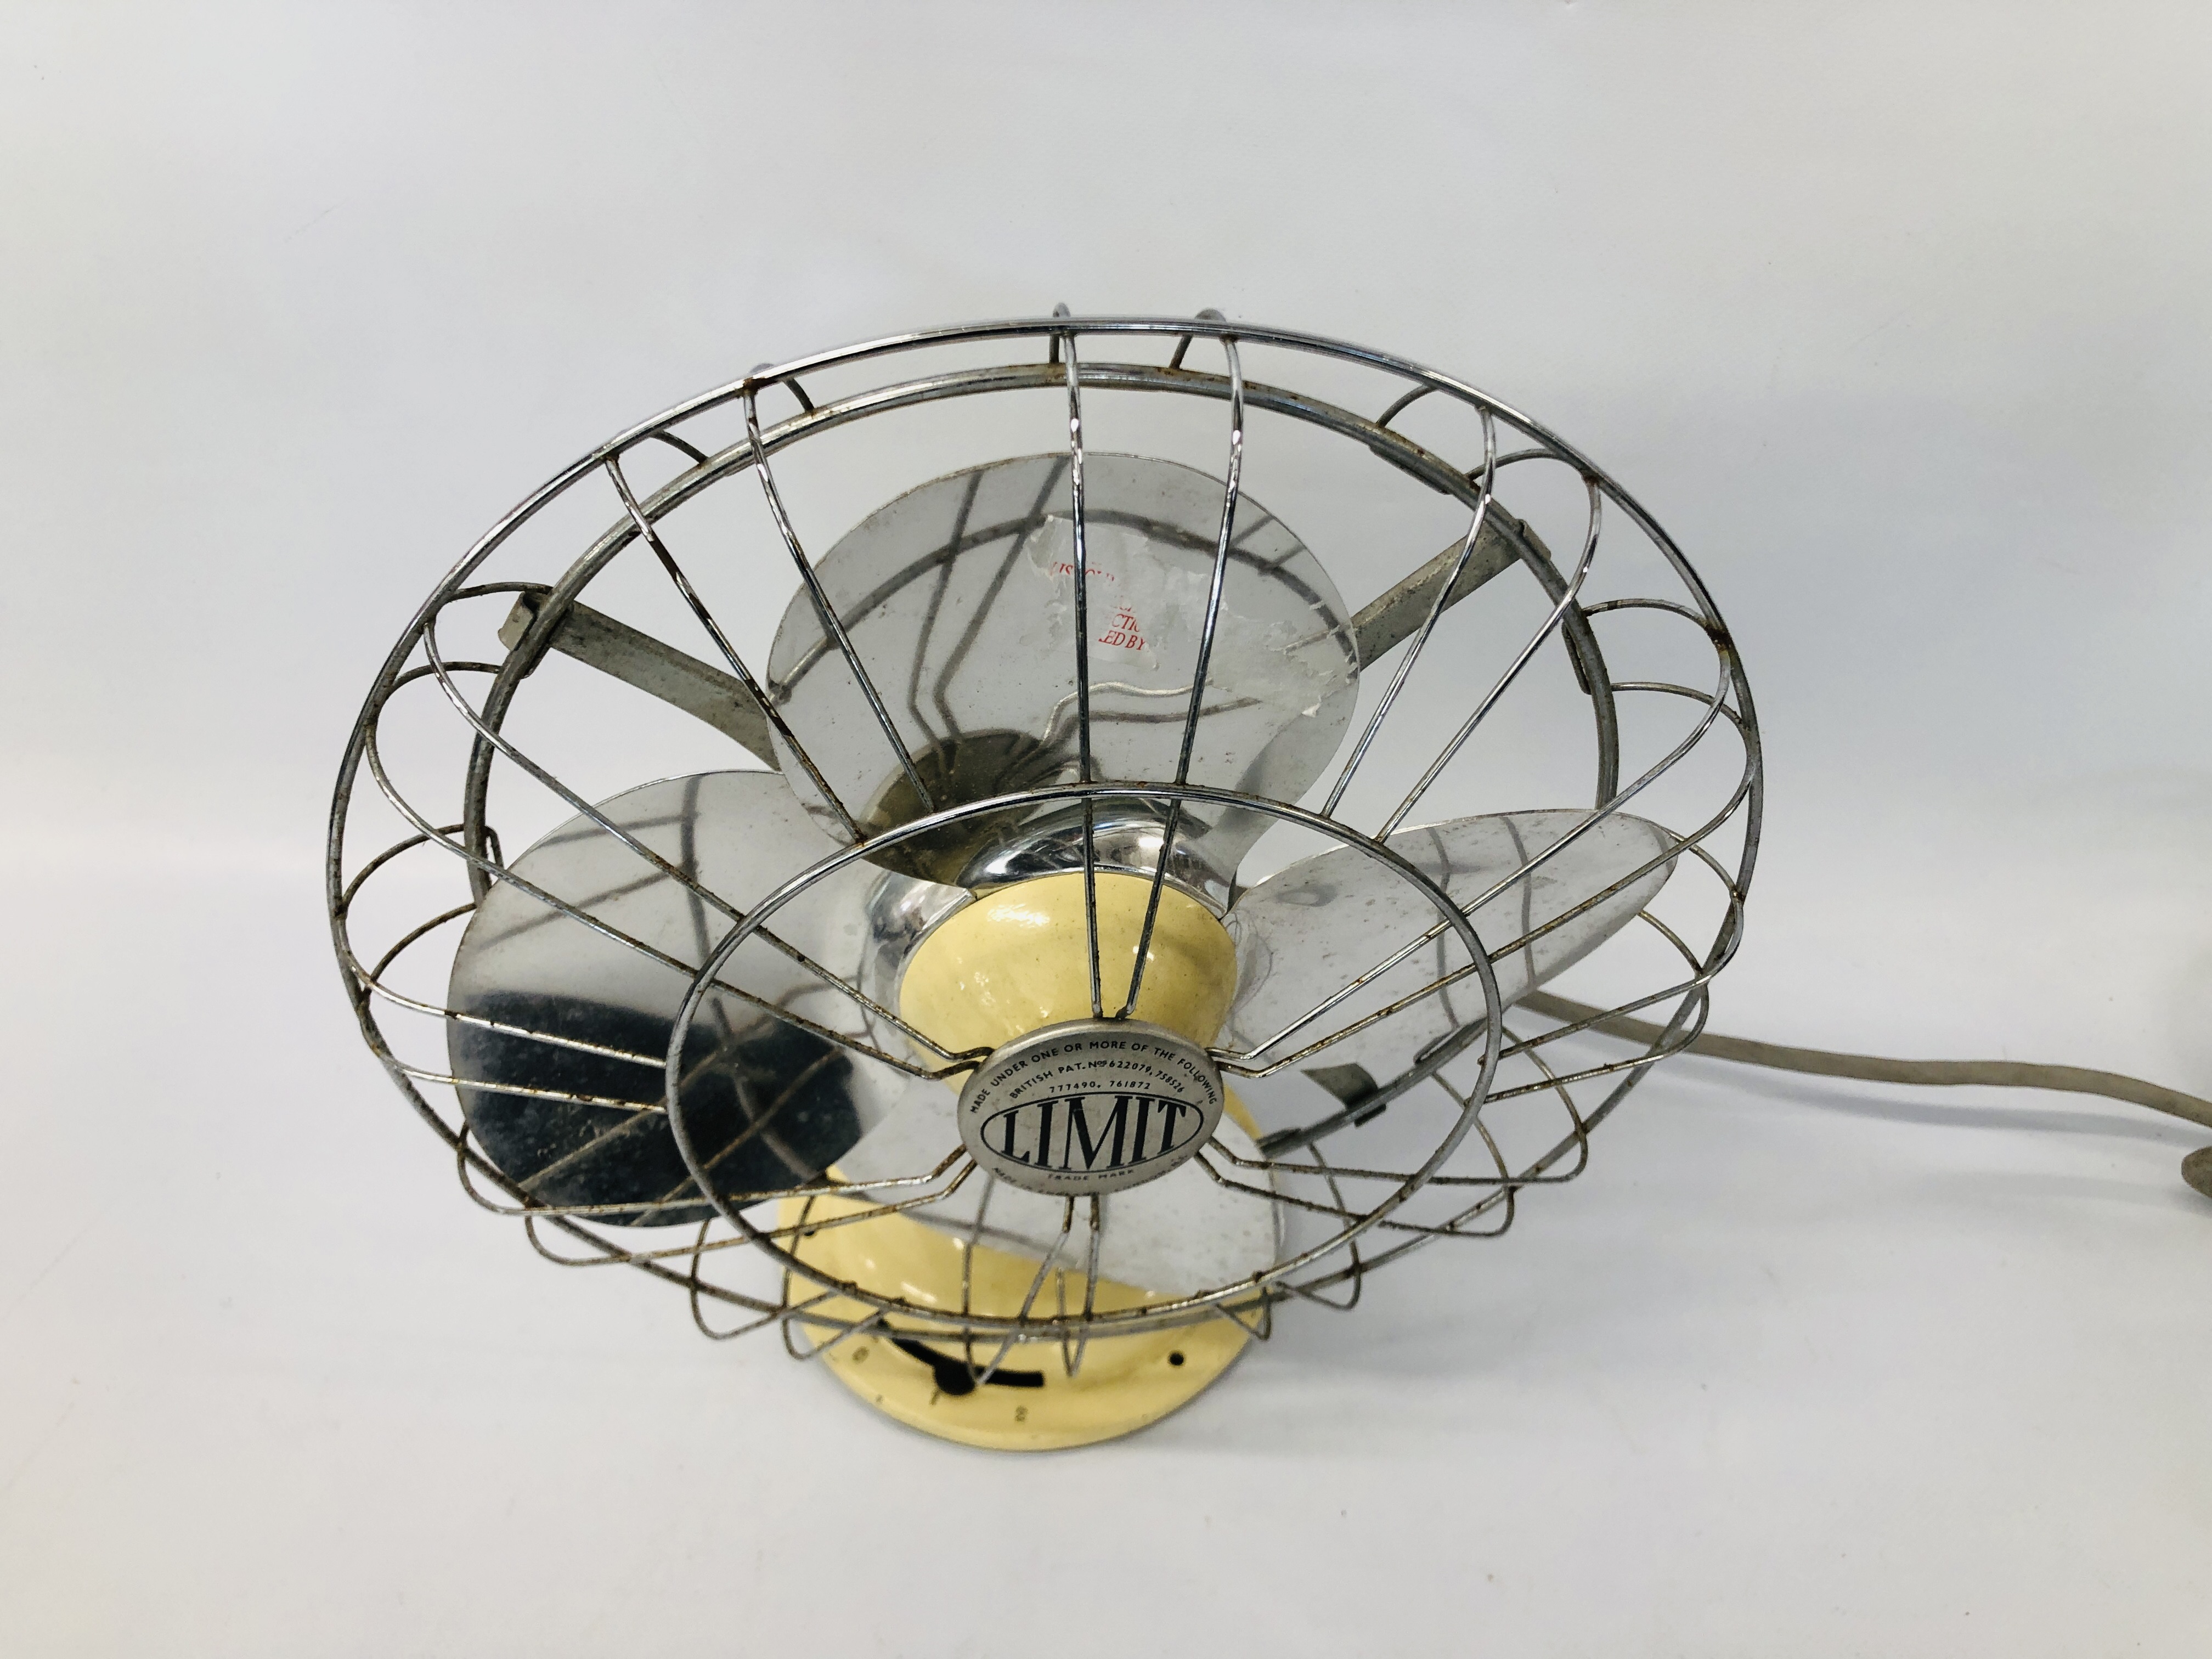 A VINTAGE 1950's LIMIT TABLE FAN No. C1/11/66 - COLLECTORS ITEM ONLY. - Image 3 of 5